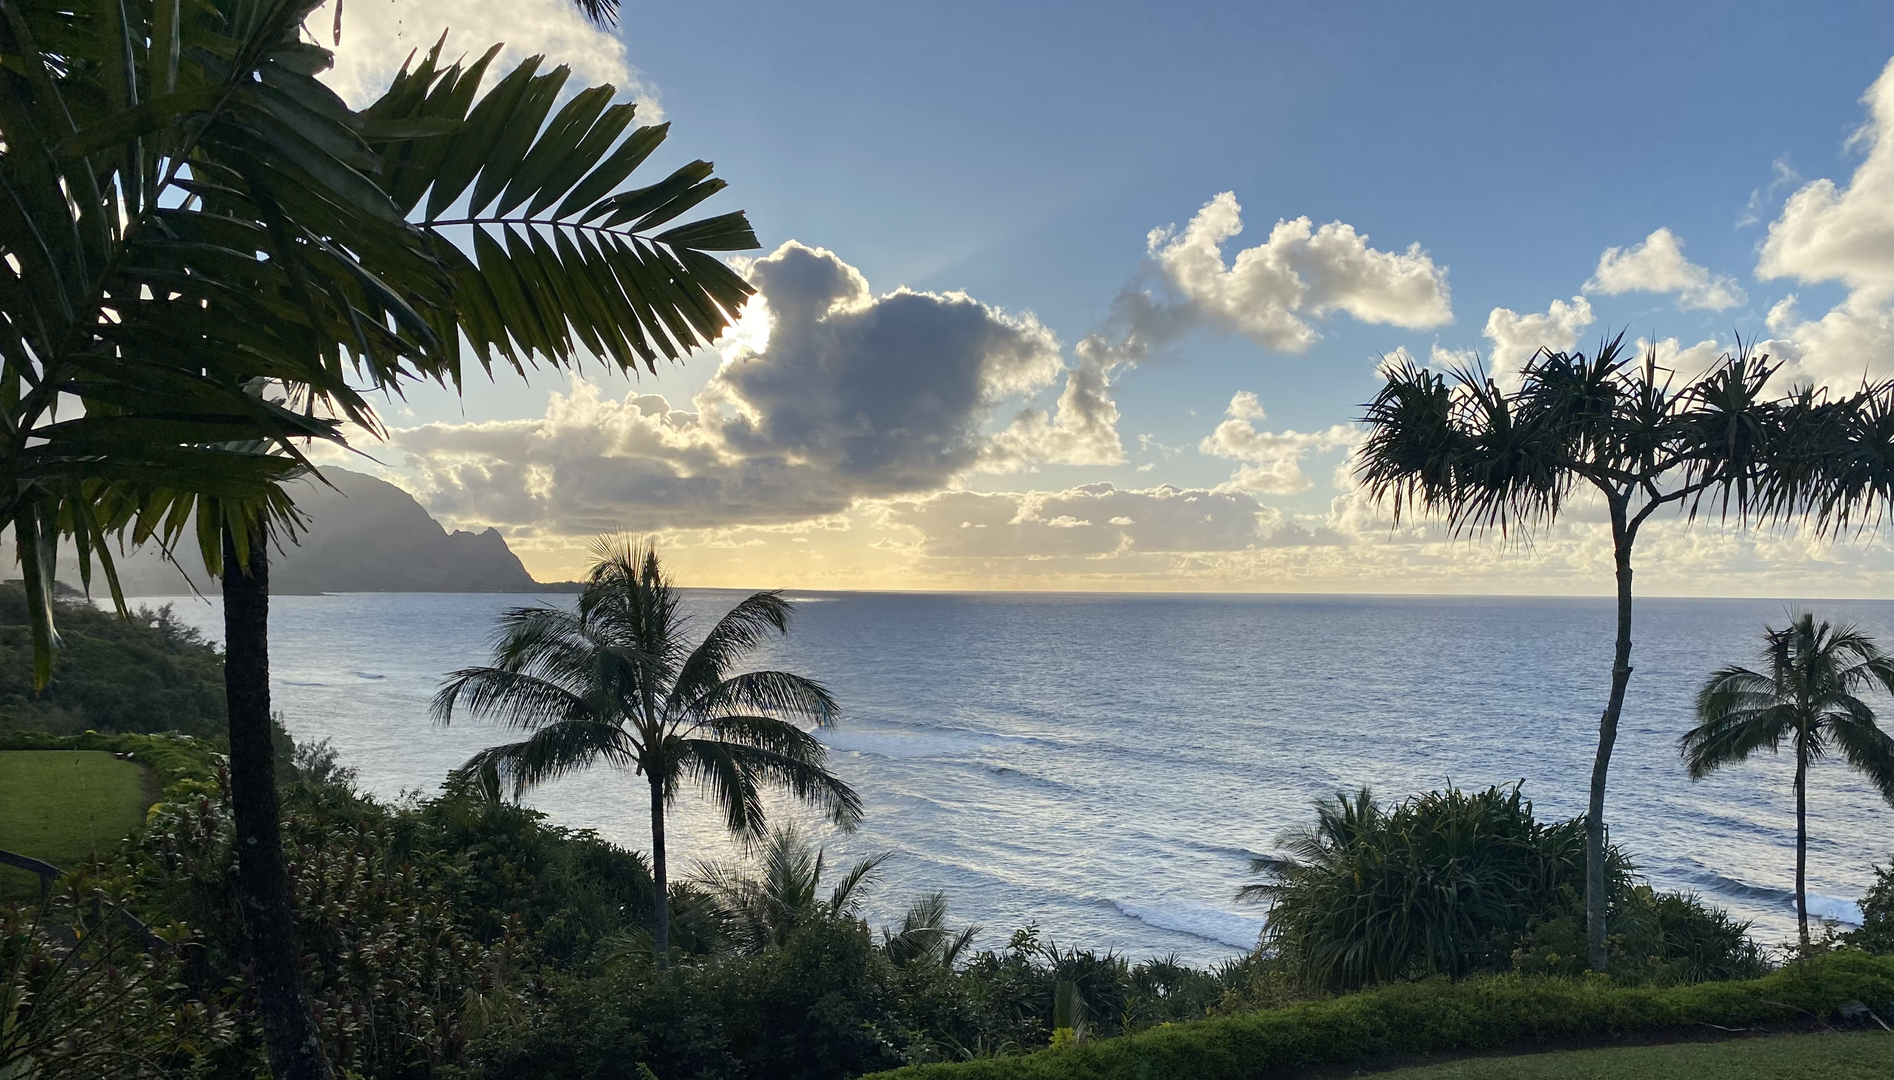 Princeville Vacation Rentals, Pali Ke Kua 207 - Welcoming view of the most beautiful Ocean from the lanai!